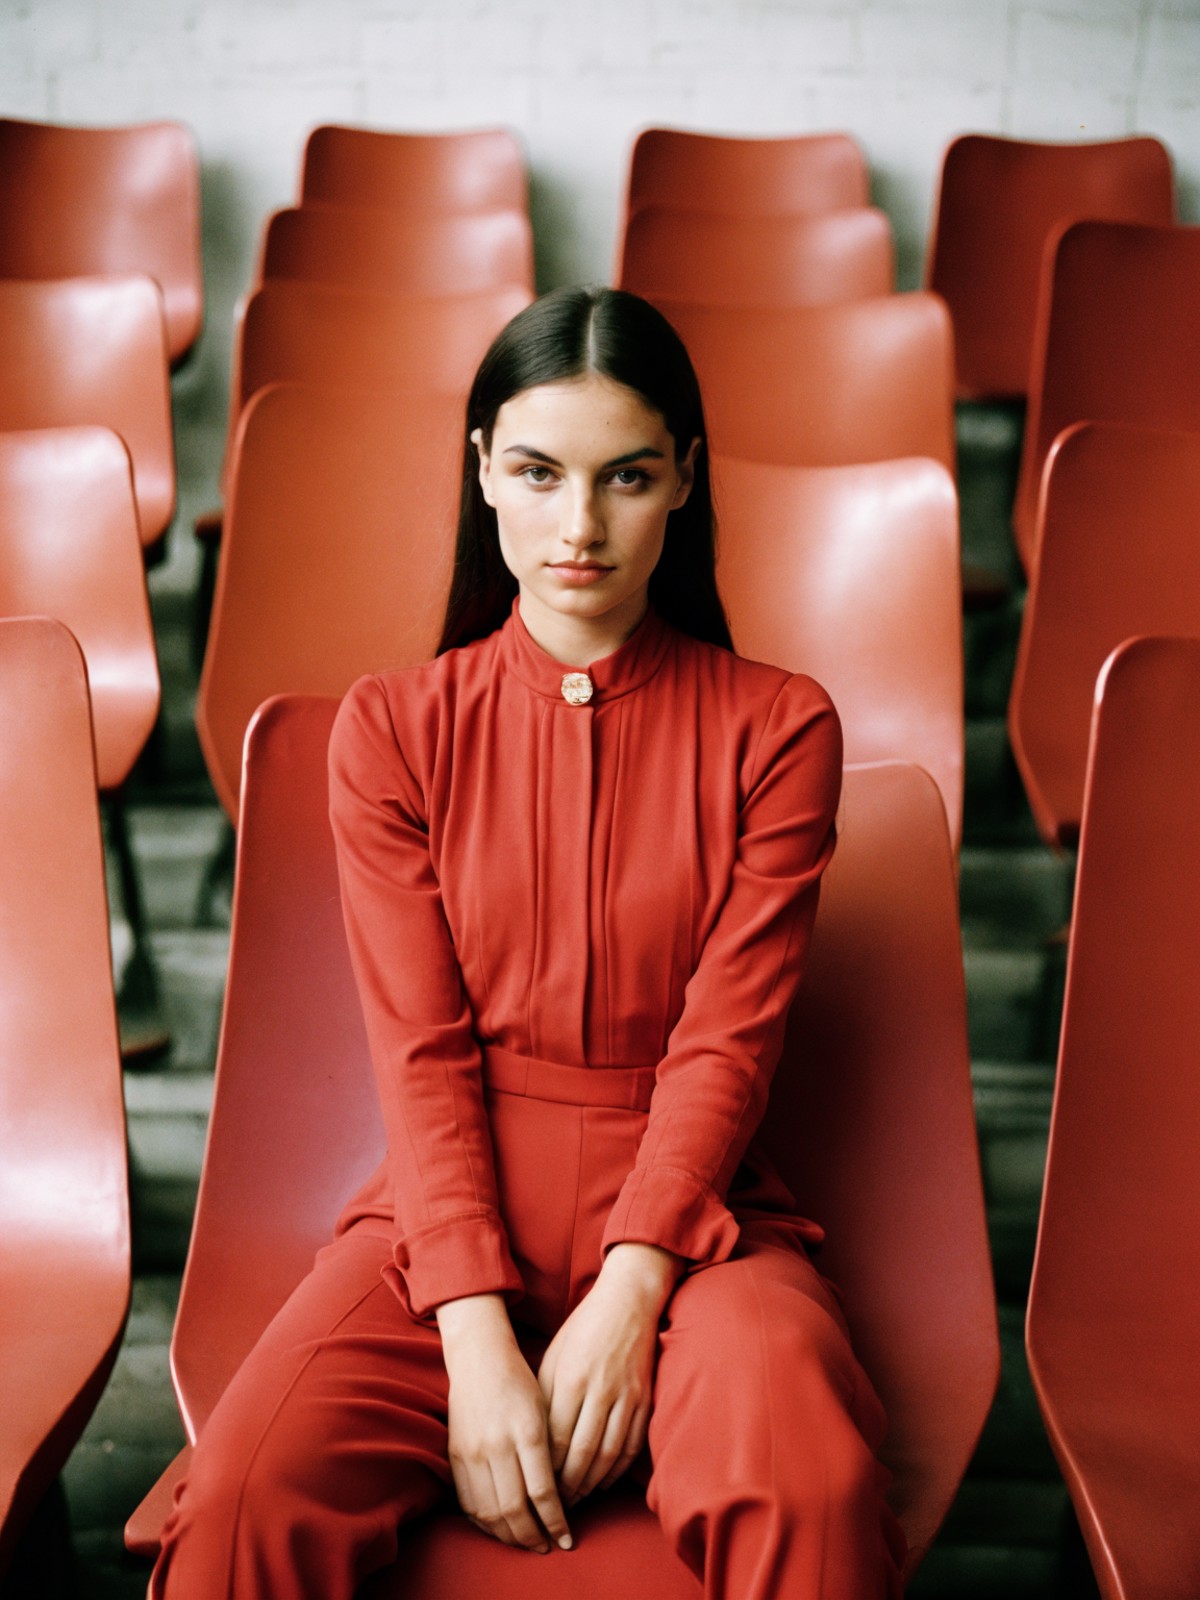 film grain analog photography,poised woman fair complexion, dressed vibrant red jumpsuit full sleeves black collar detail,...